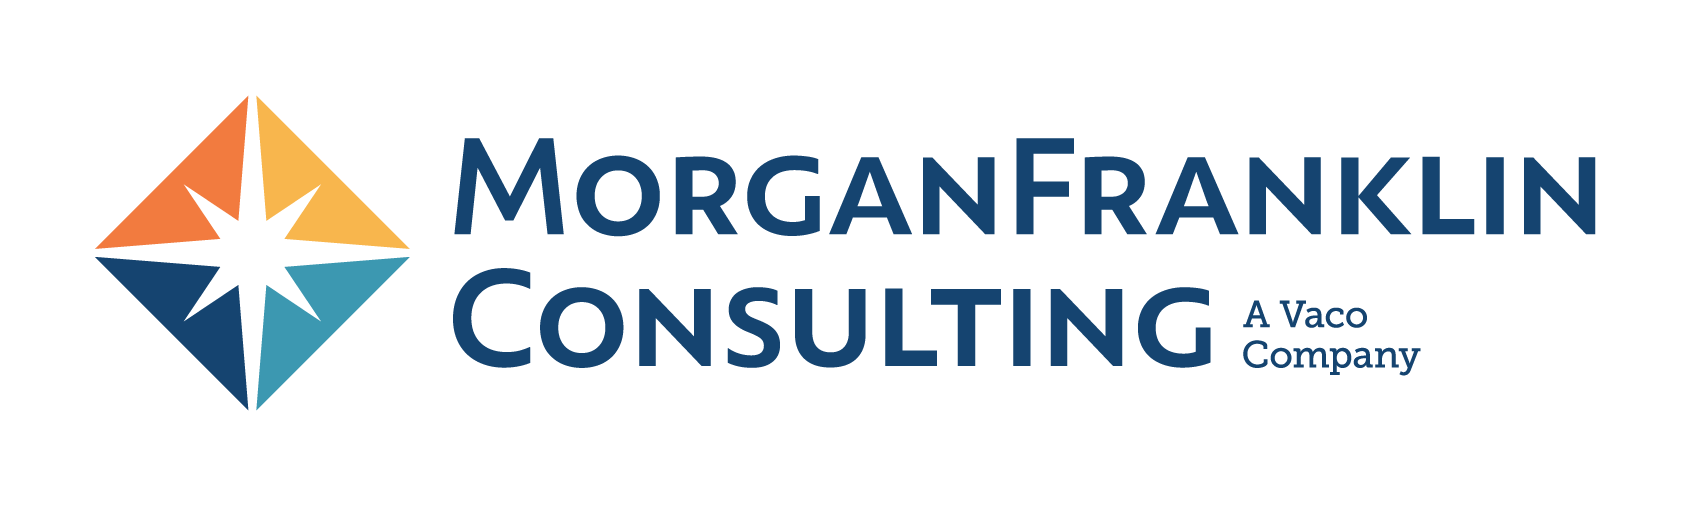 MorganFranklin Consulting